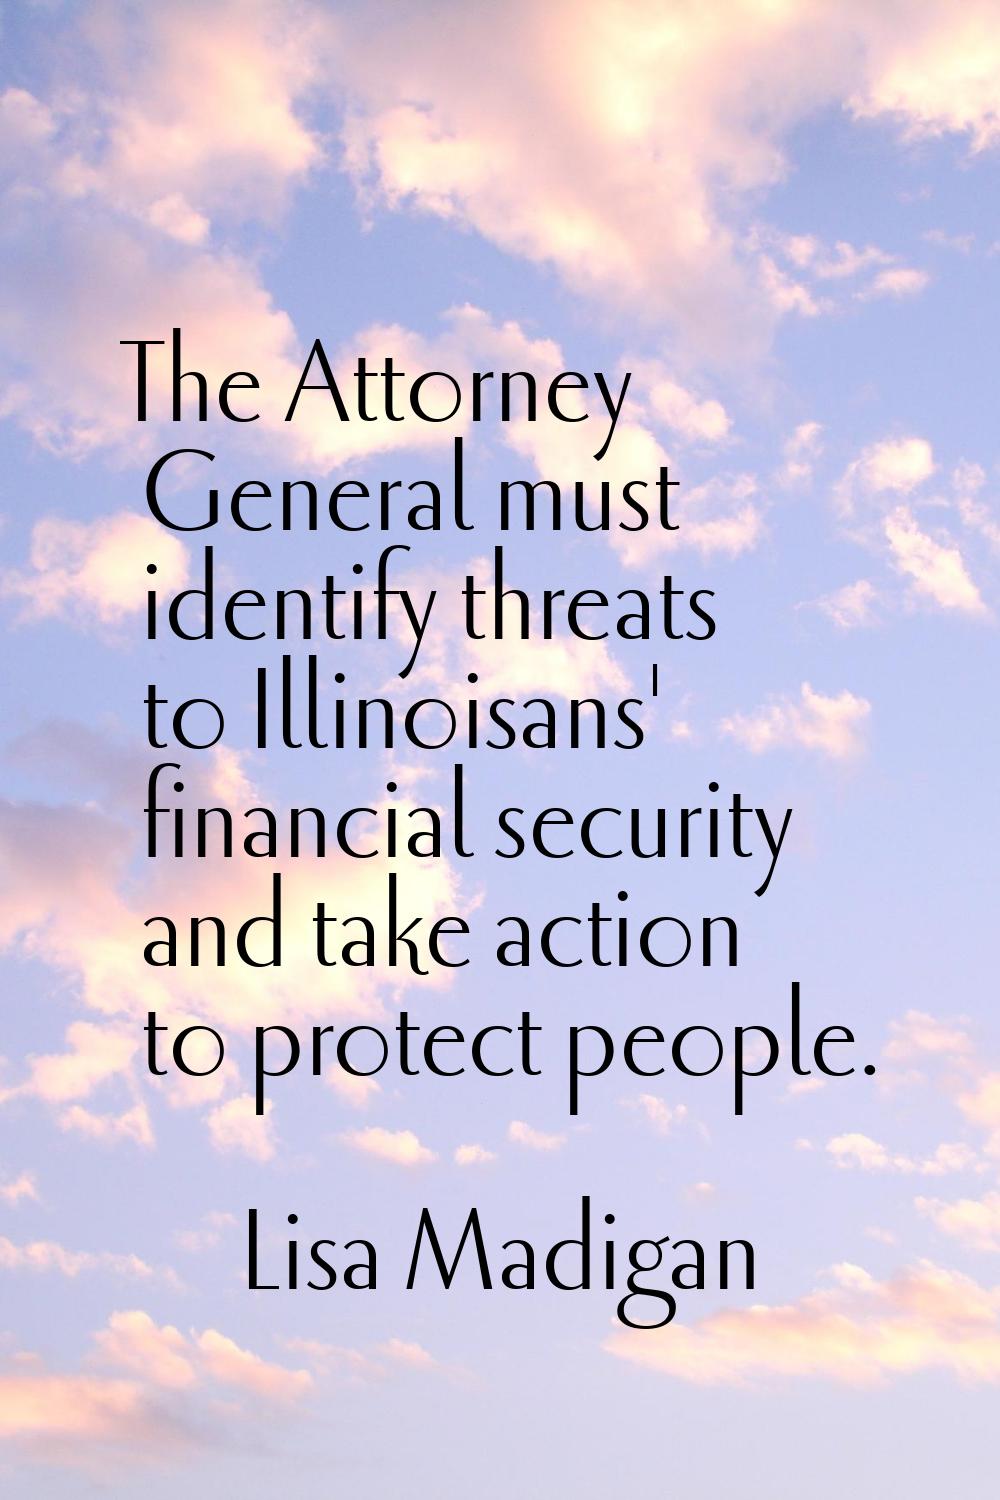 The Attorney General must identify threats to Illinoisans' financial security and take action to pr